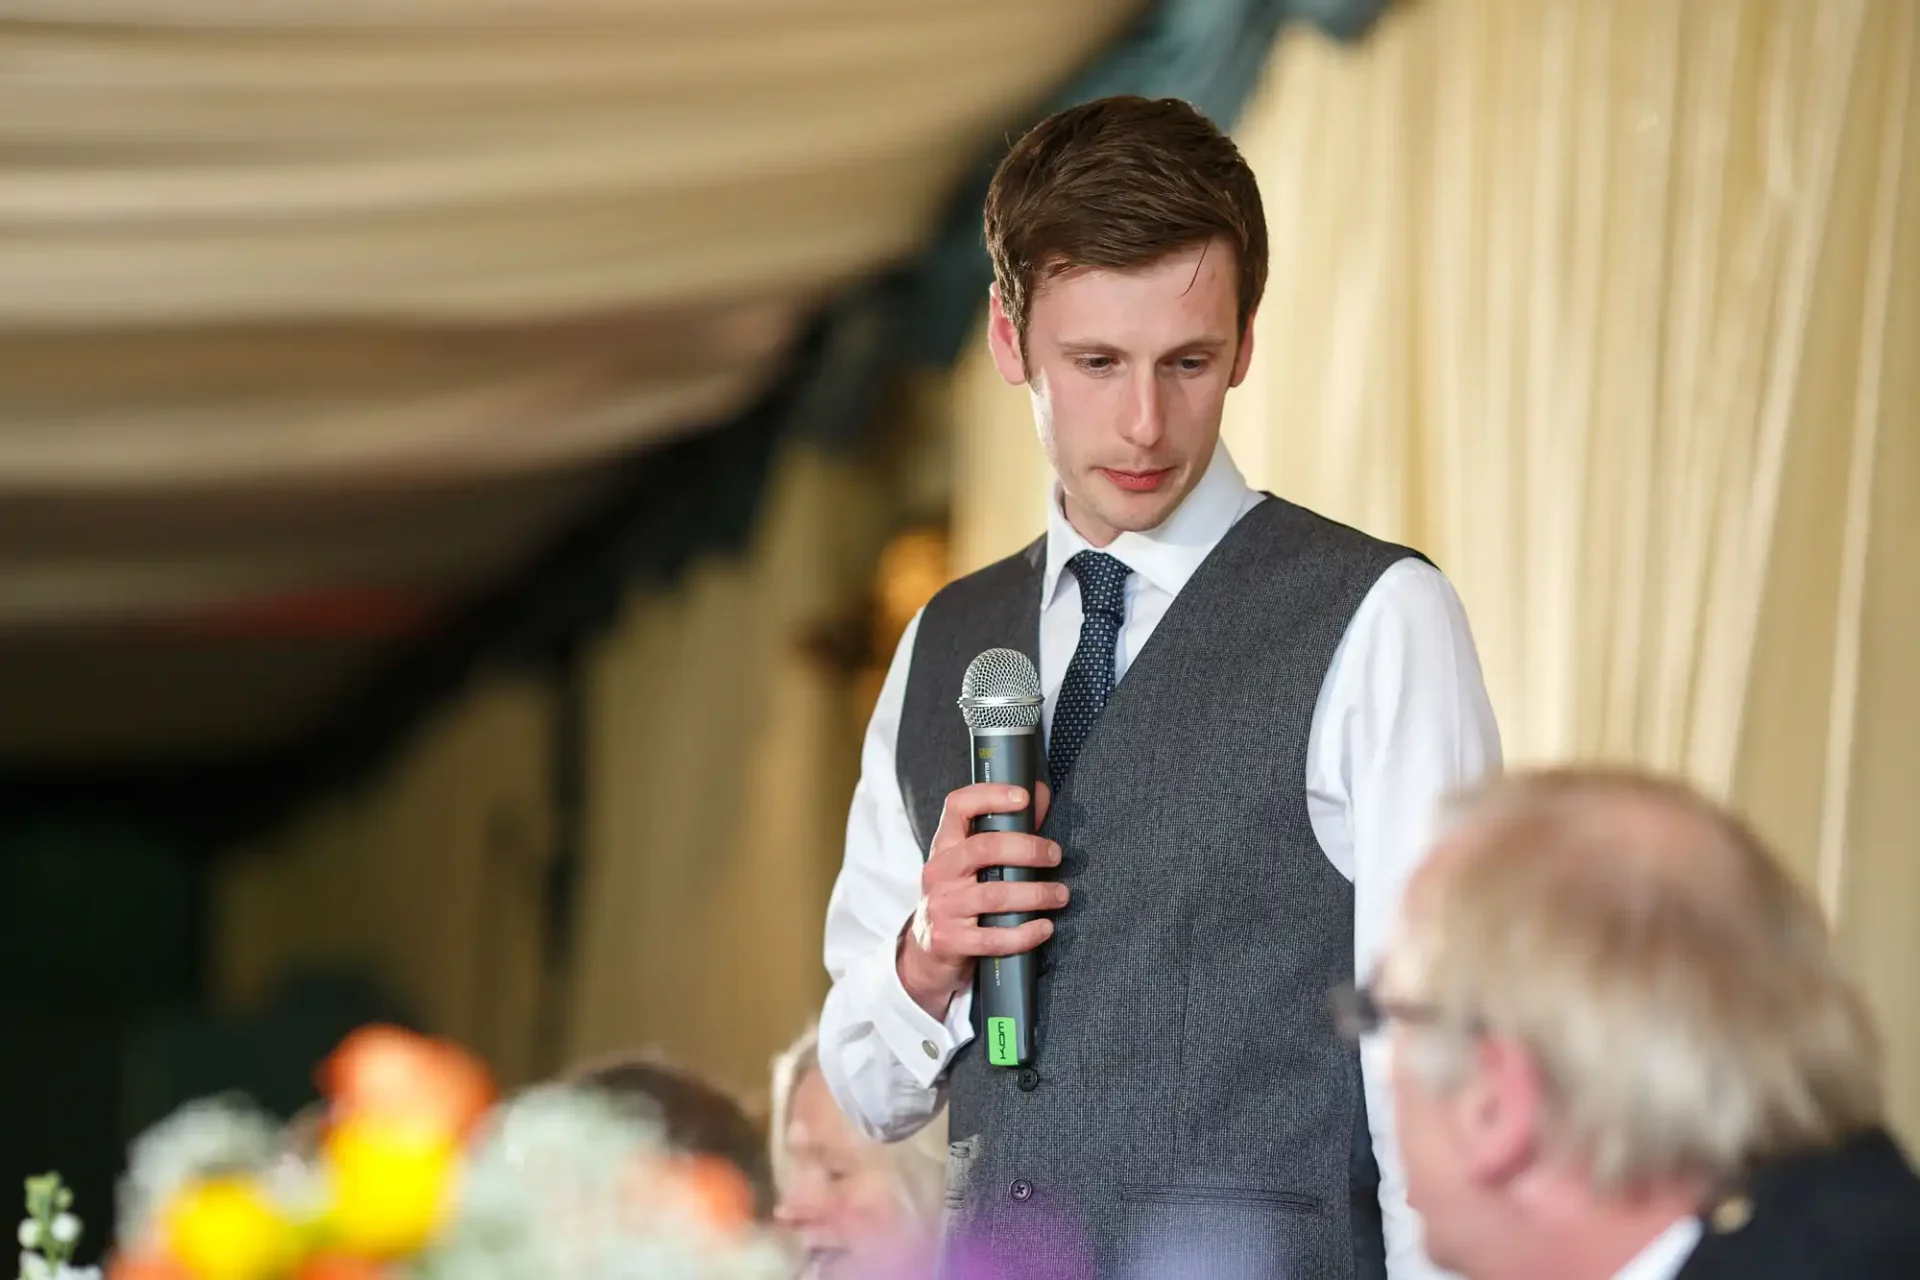 A young man in a vest holding a microphone, giving a speech at an indoor event, with blurred audience members in the foreground.